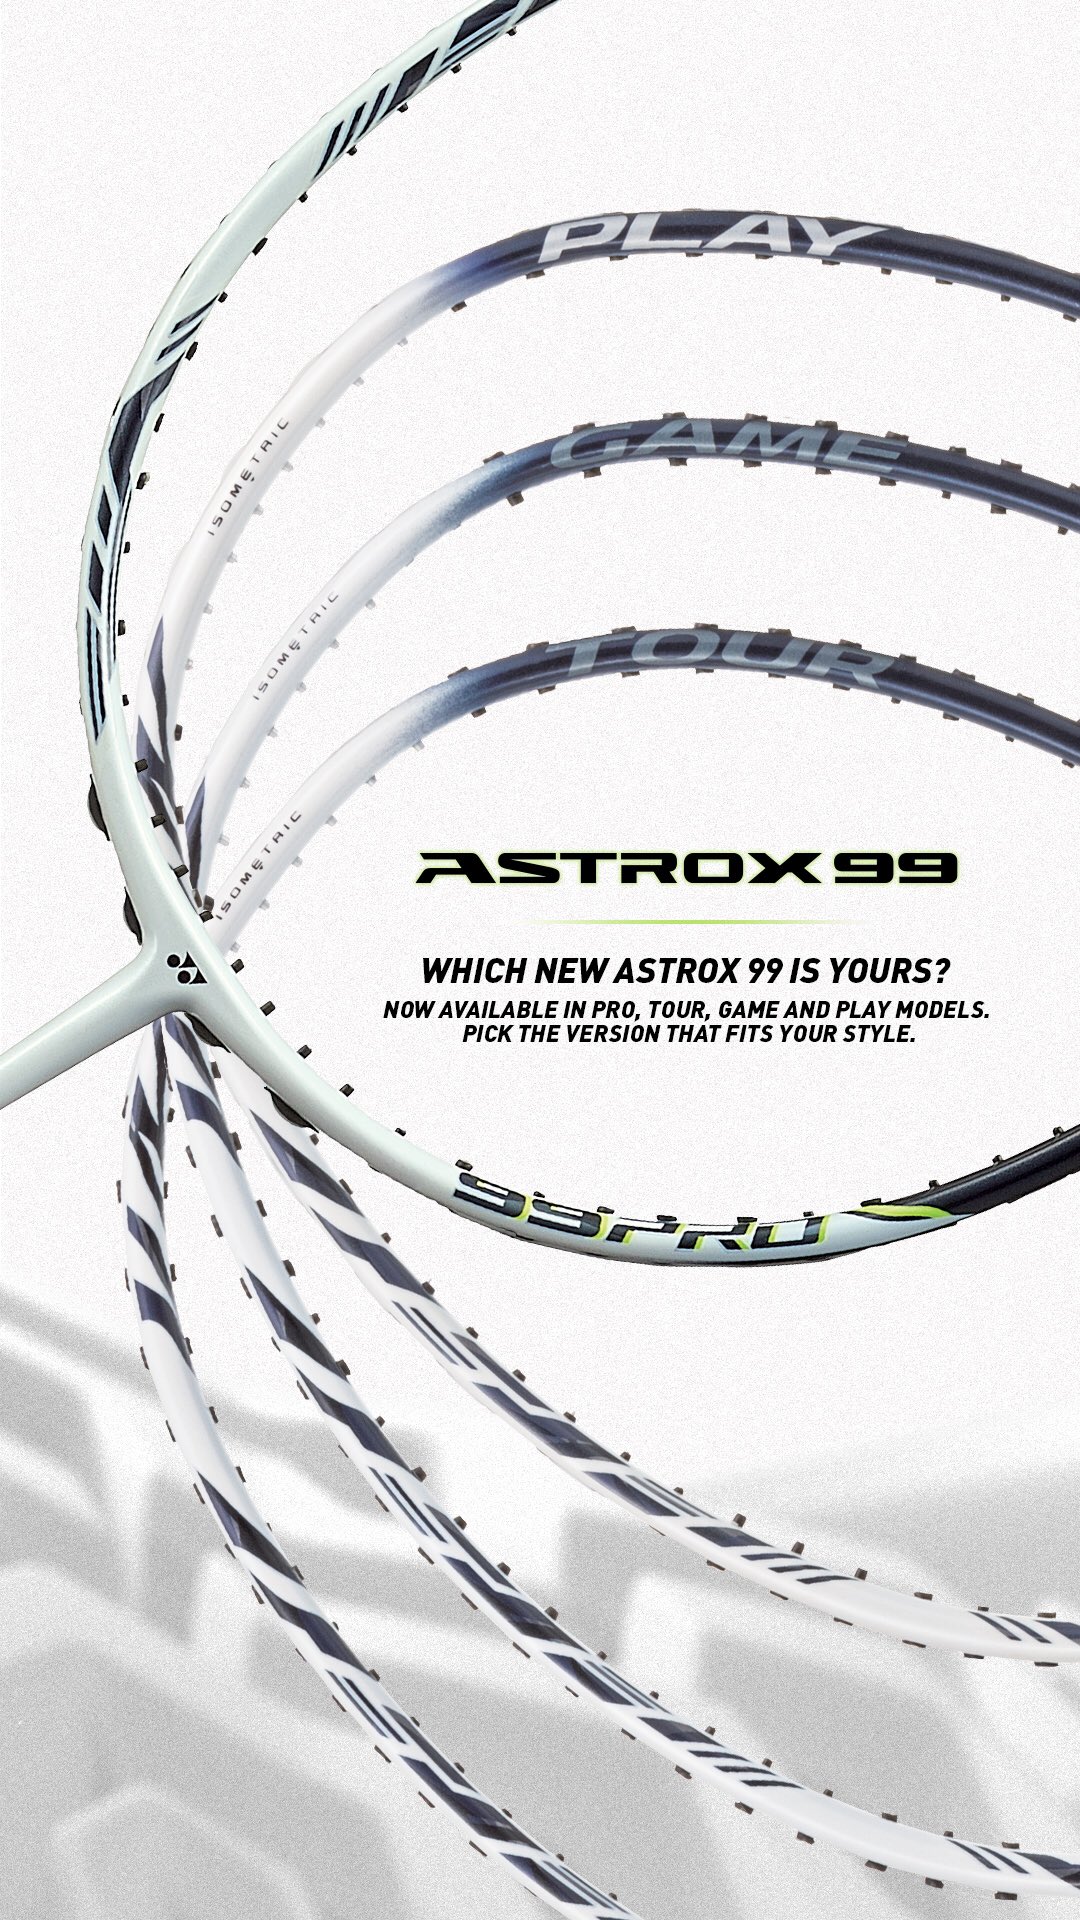 Yonex Badminton The New Astrox 99 Is Available In Pro Tour Game And Play Each Model Fine Tuned With The Same Play Concept But To Reach More Players Around